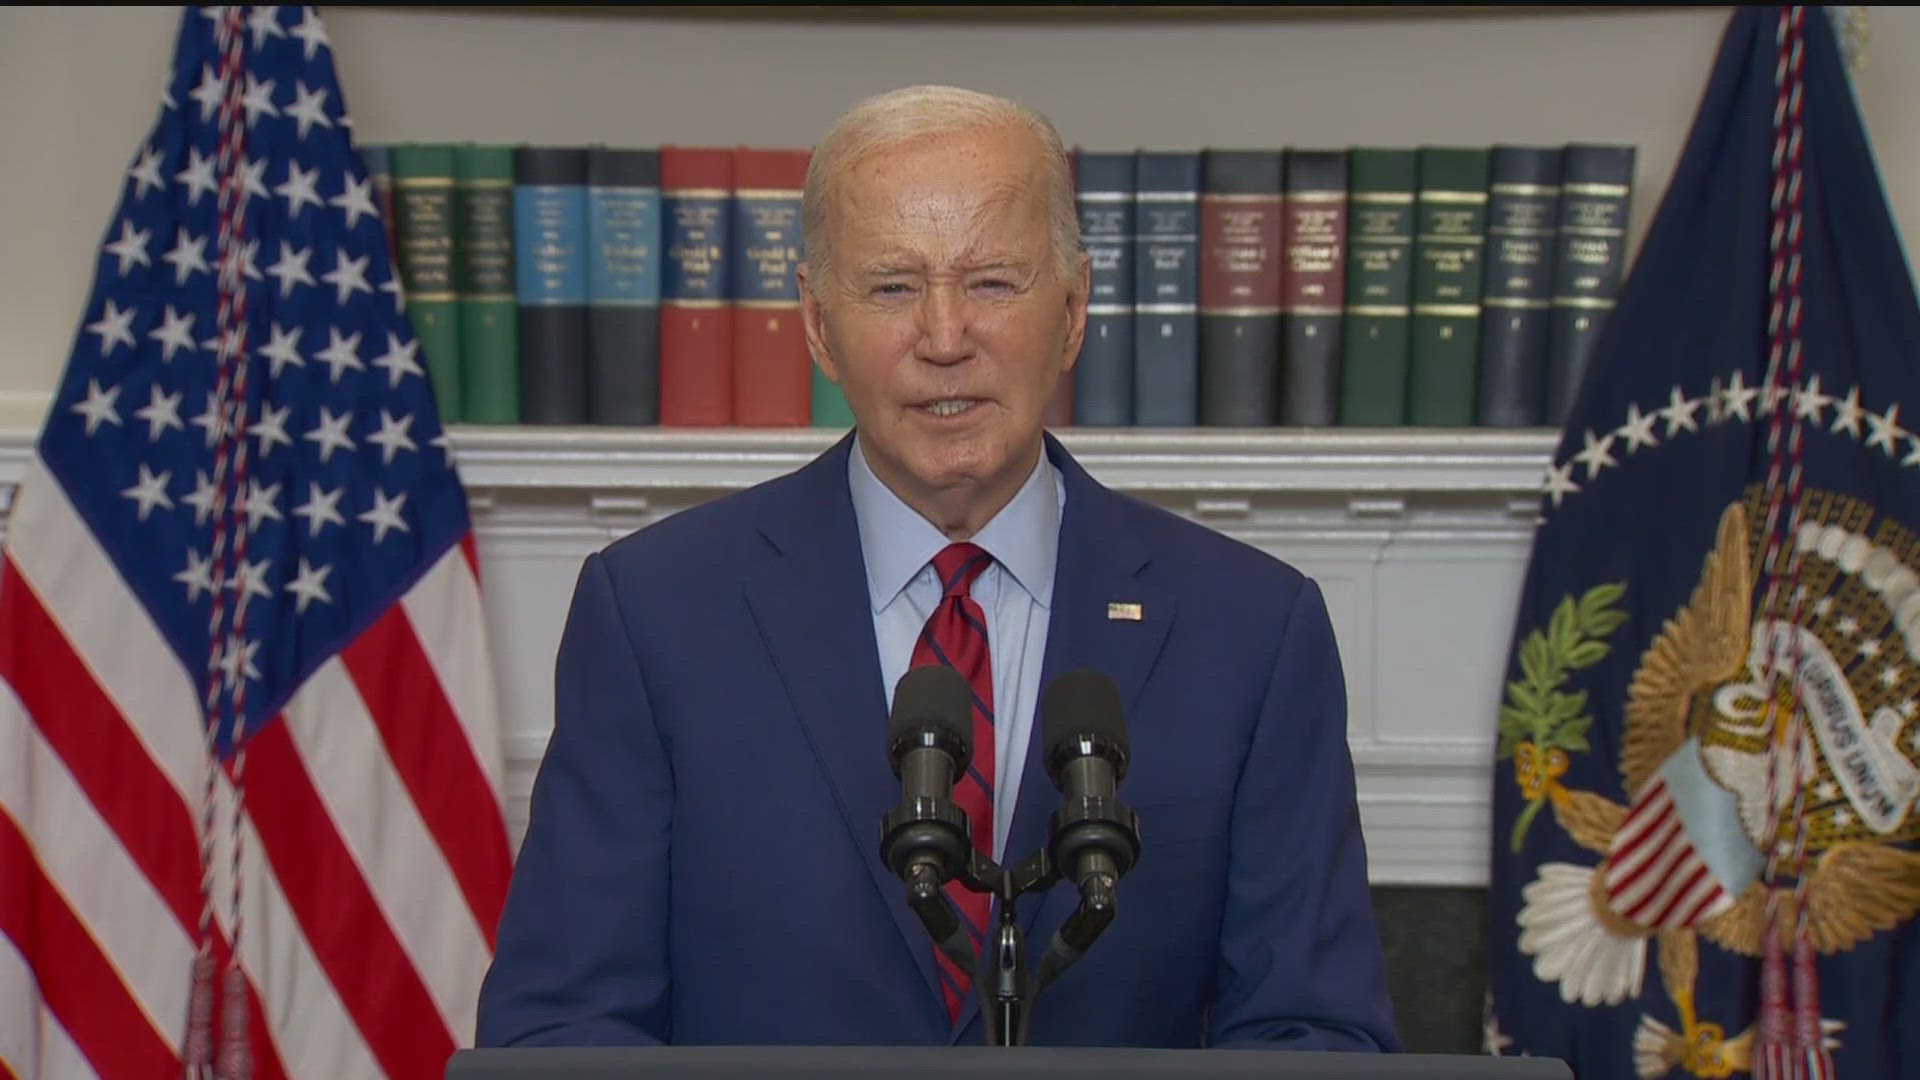 Biden said there should be no place for antisemitism or hate speech on college campuses.